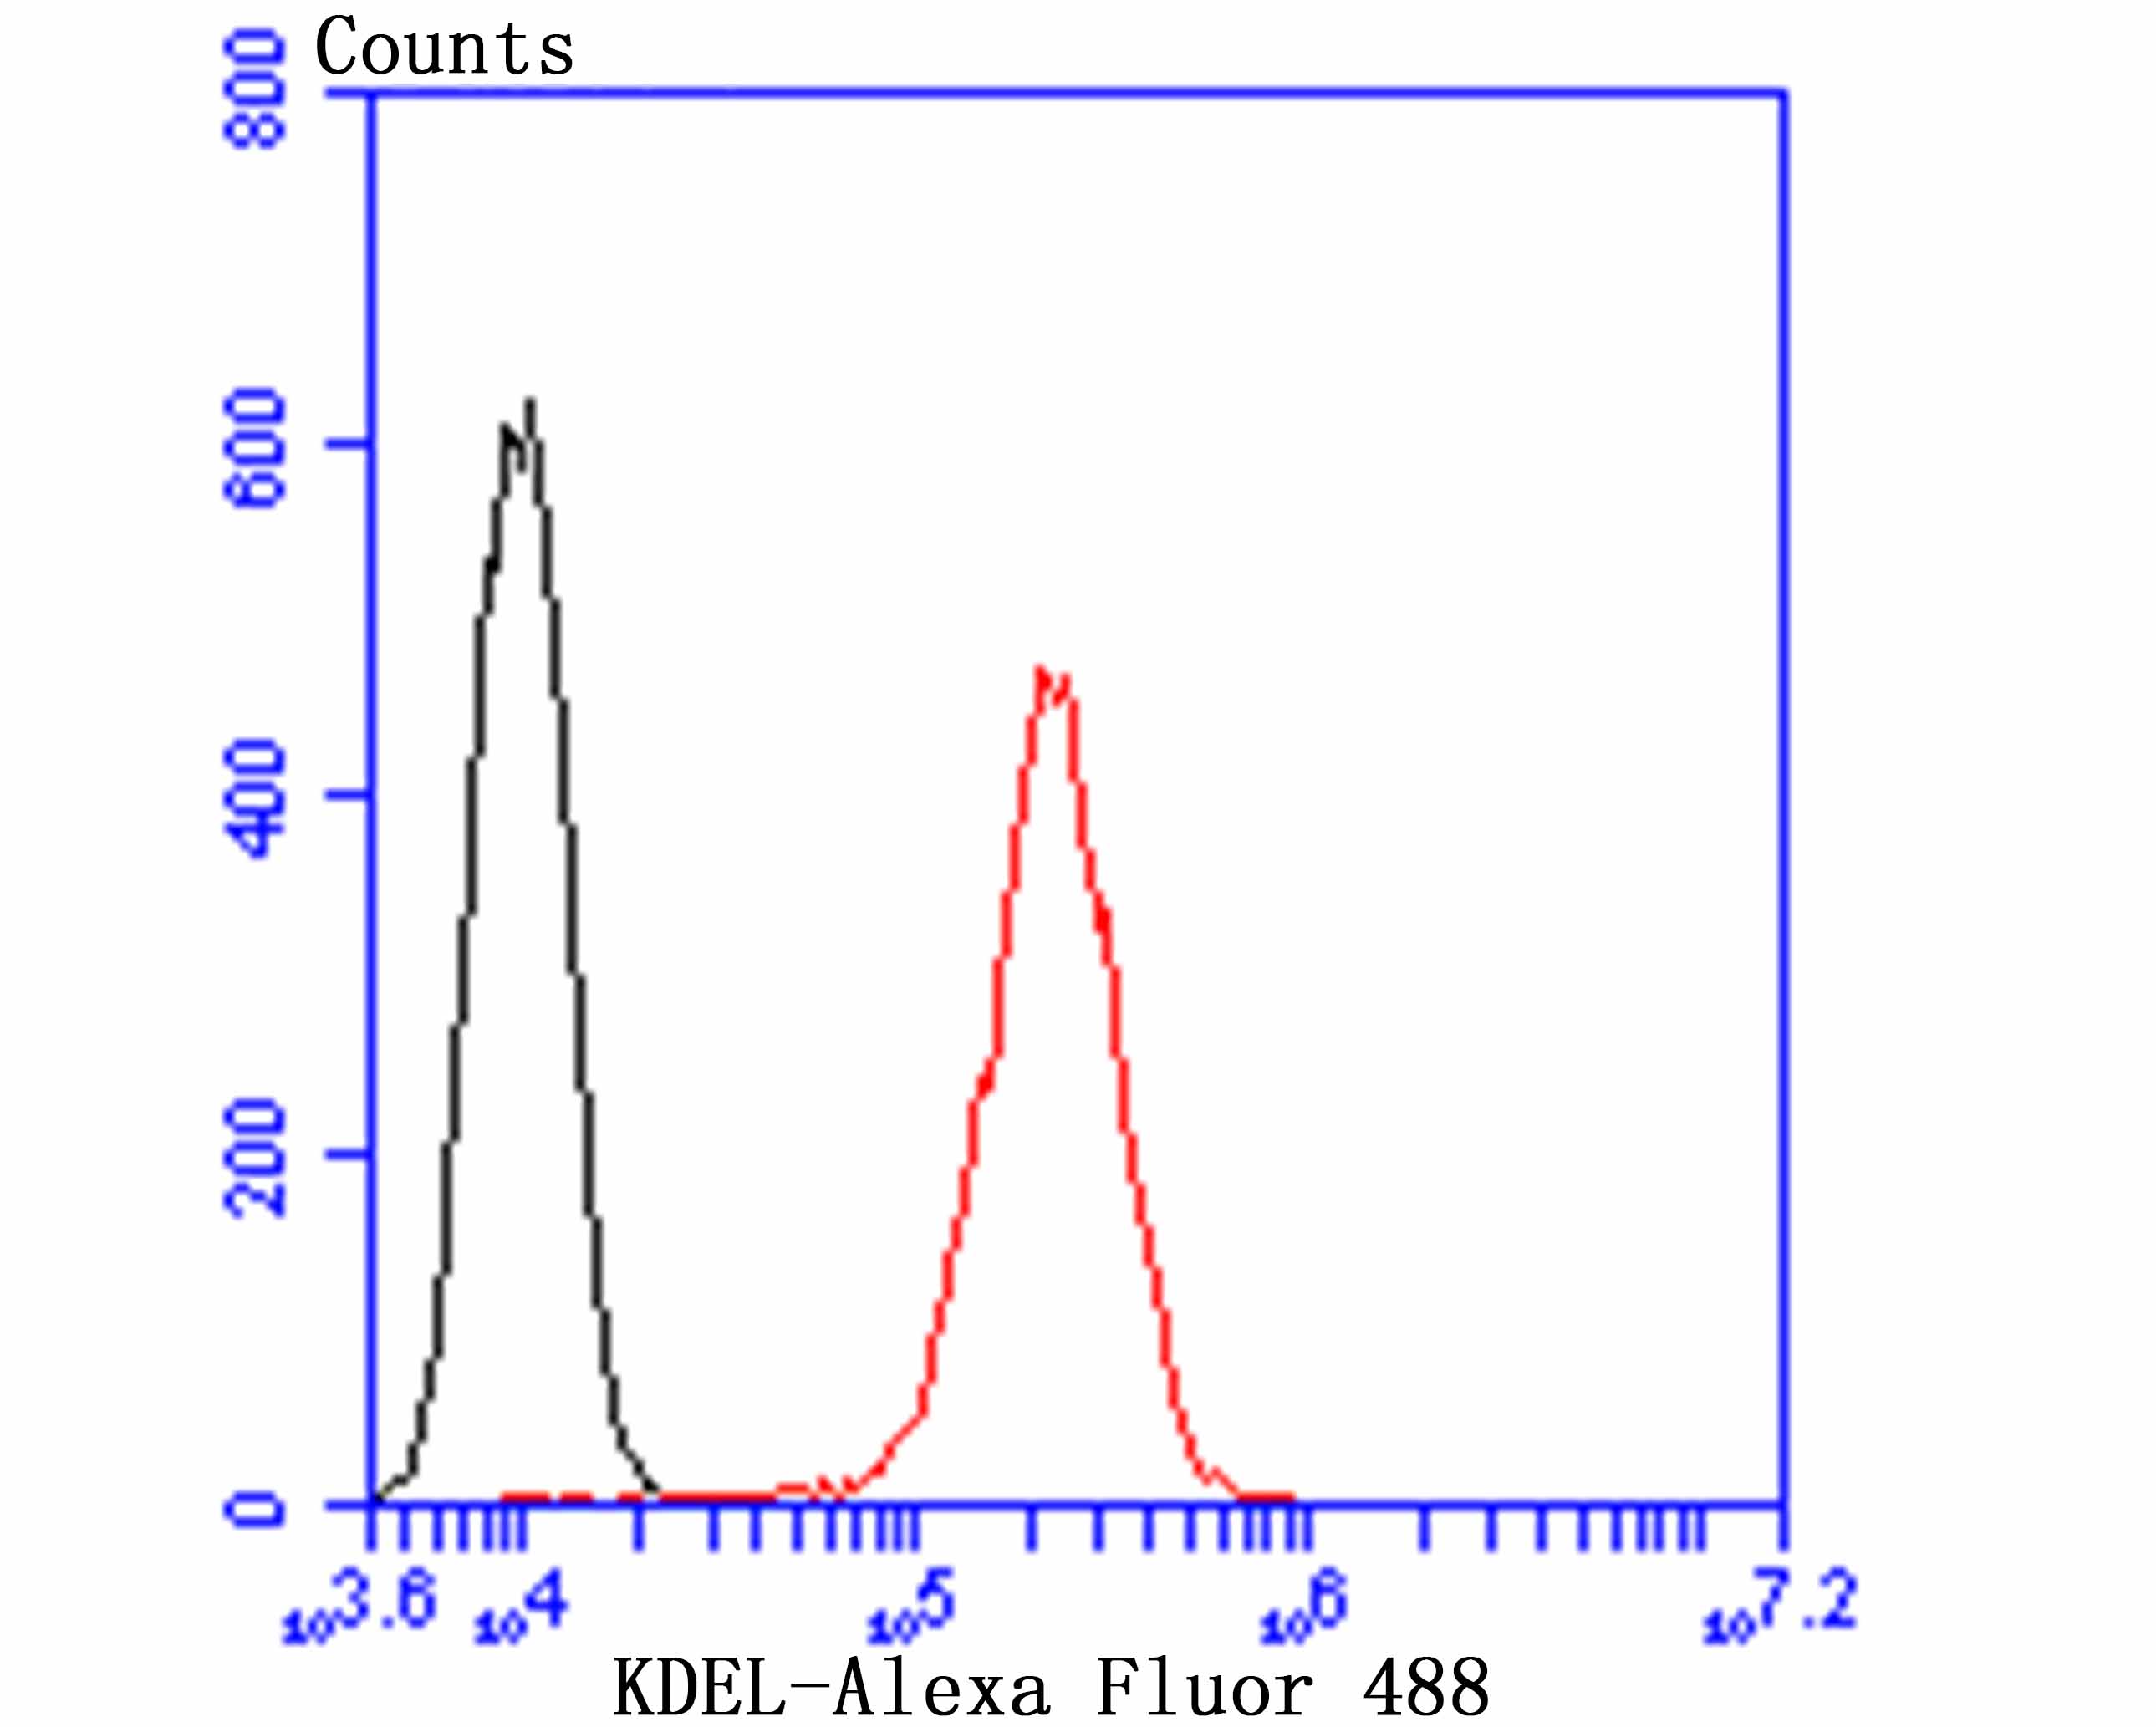 Flow cytometric analysis of KDEL was done on HepG2 cells. The cells were fixed, permeabilized and stained with the primary antibody (ET7107-86, 1/50) (red). After incubation of the primary antibody at room temperature for an hour, the cells were stained with a Alexa Fluor 488-conjugated Goat anti-Rabbit IgG Secondary antibody at 1/1000 dilution for 30 minutes.Unlabelled sample was used as a control (cells without incubation with primary antibody; black).